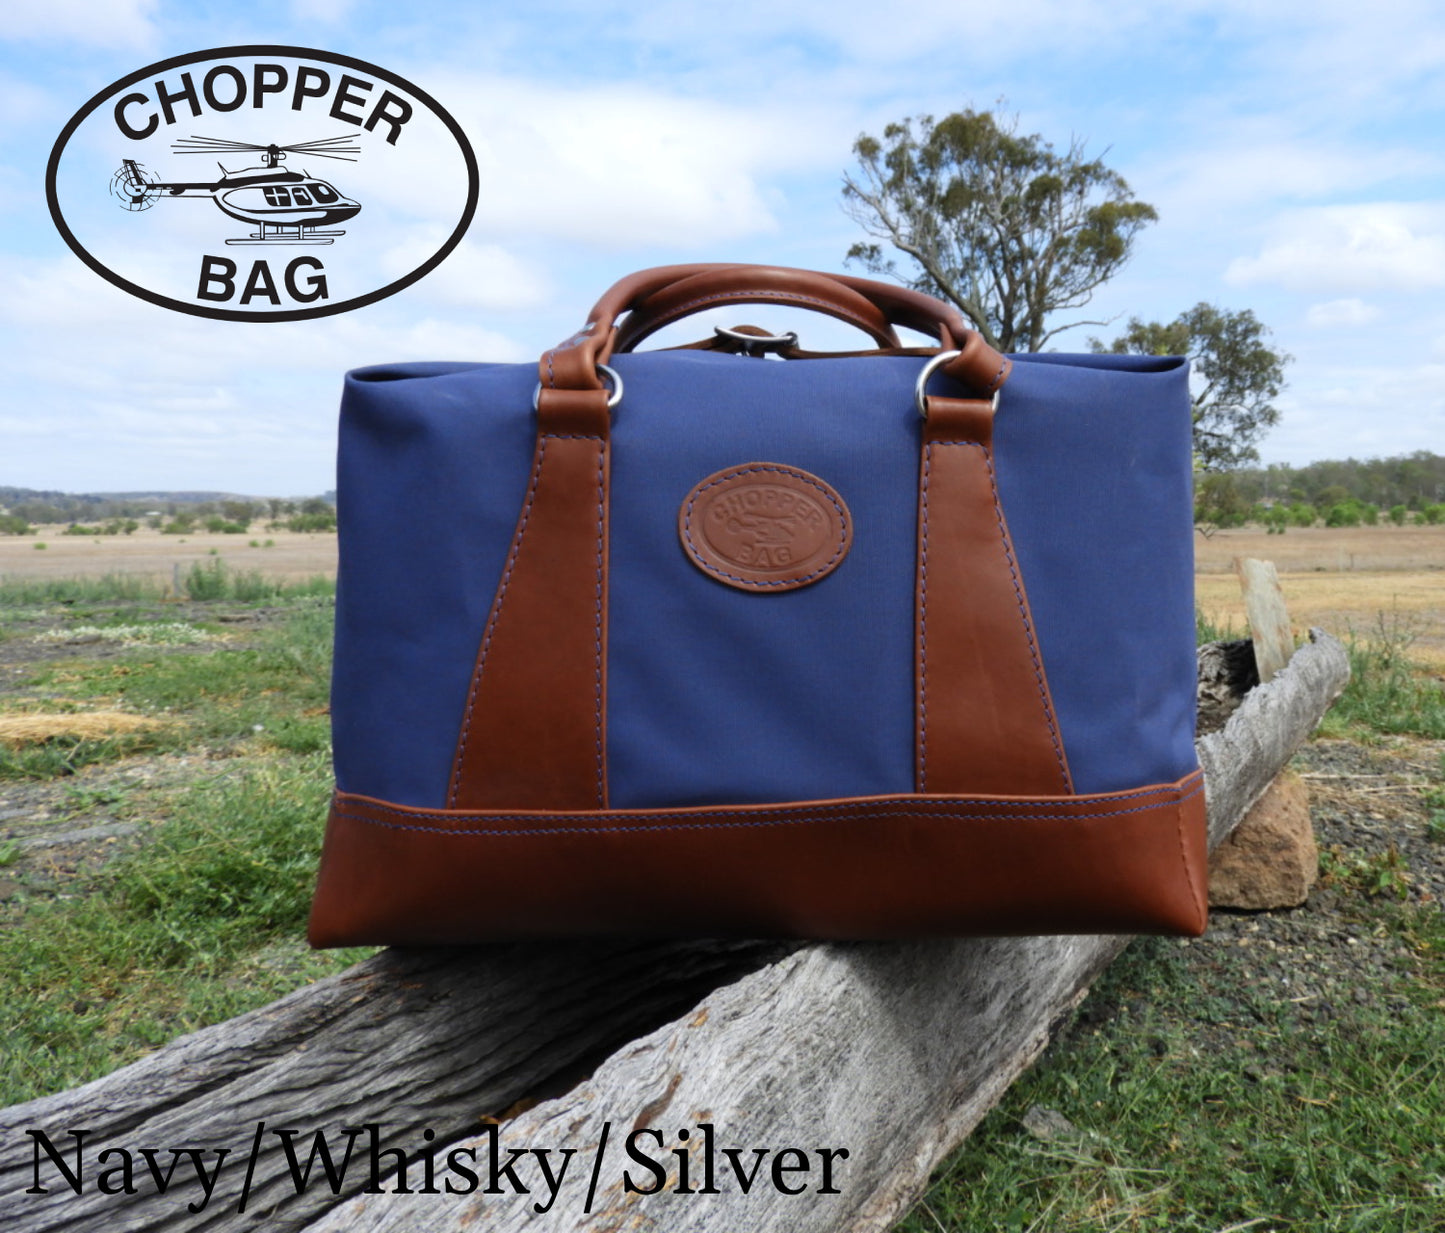 Chopper Bag - SMALL - Canvas/Leather